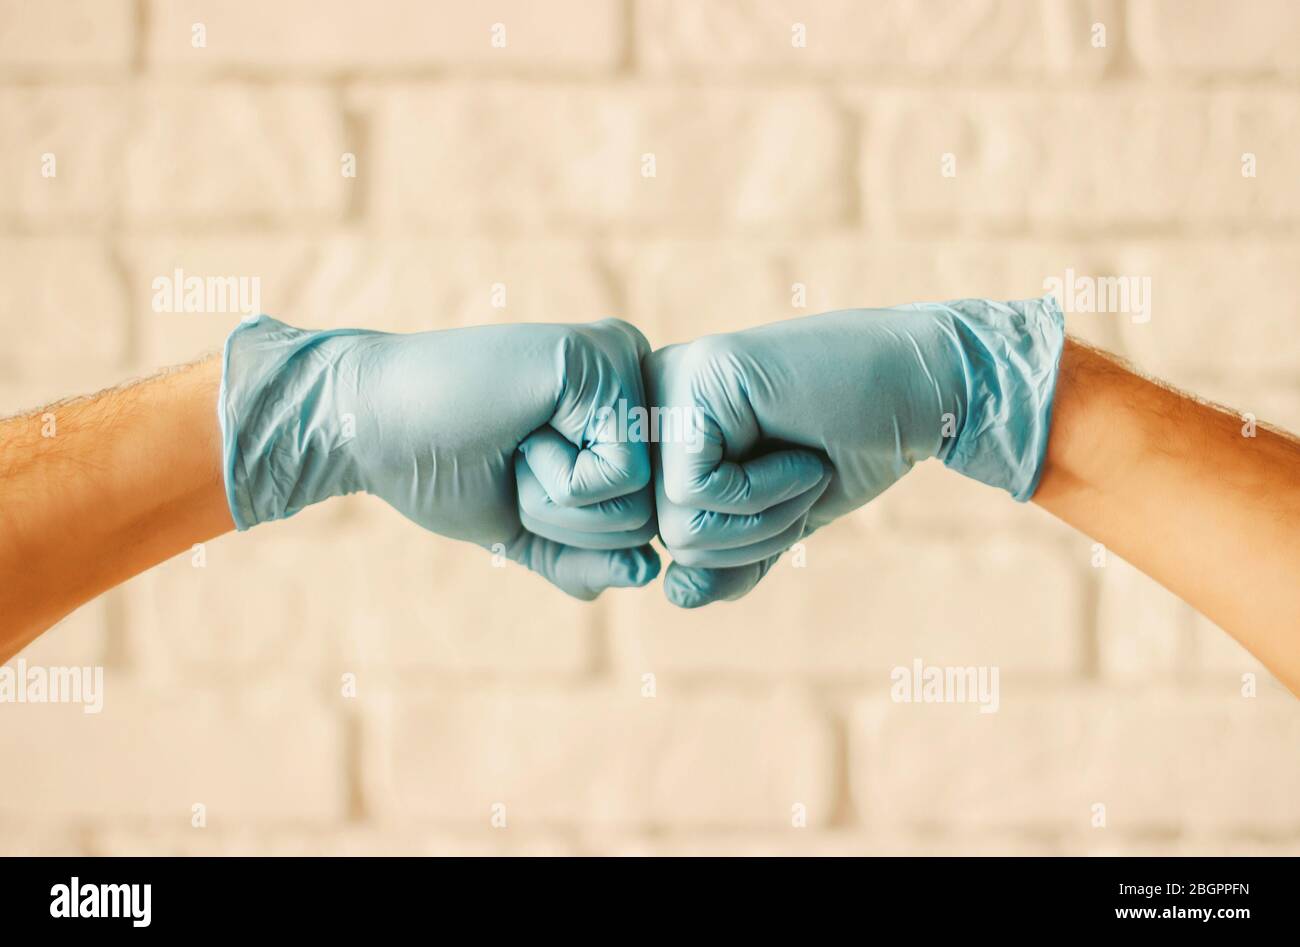 Two men bumping hands in blue medical gloves as protection against coronavirus. Doctor surgeons in blue protective latex gloves clapping fists. COVID- Stock Photo